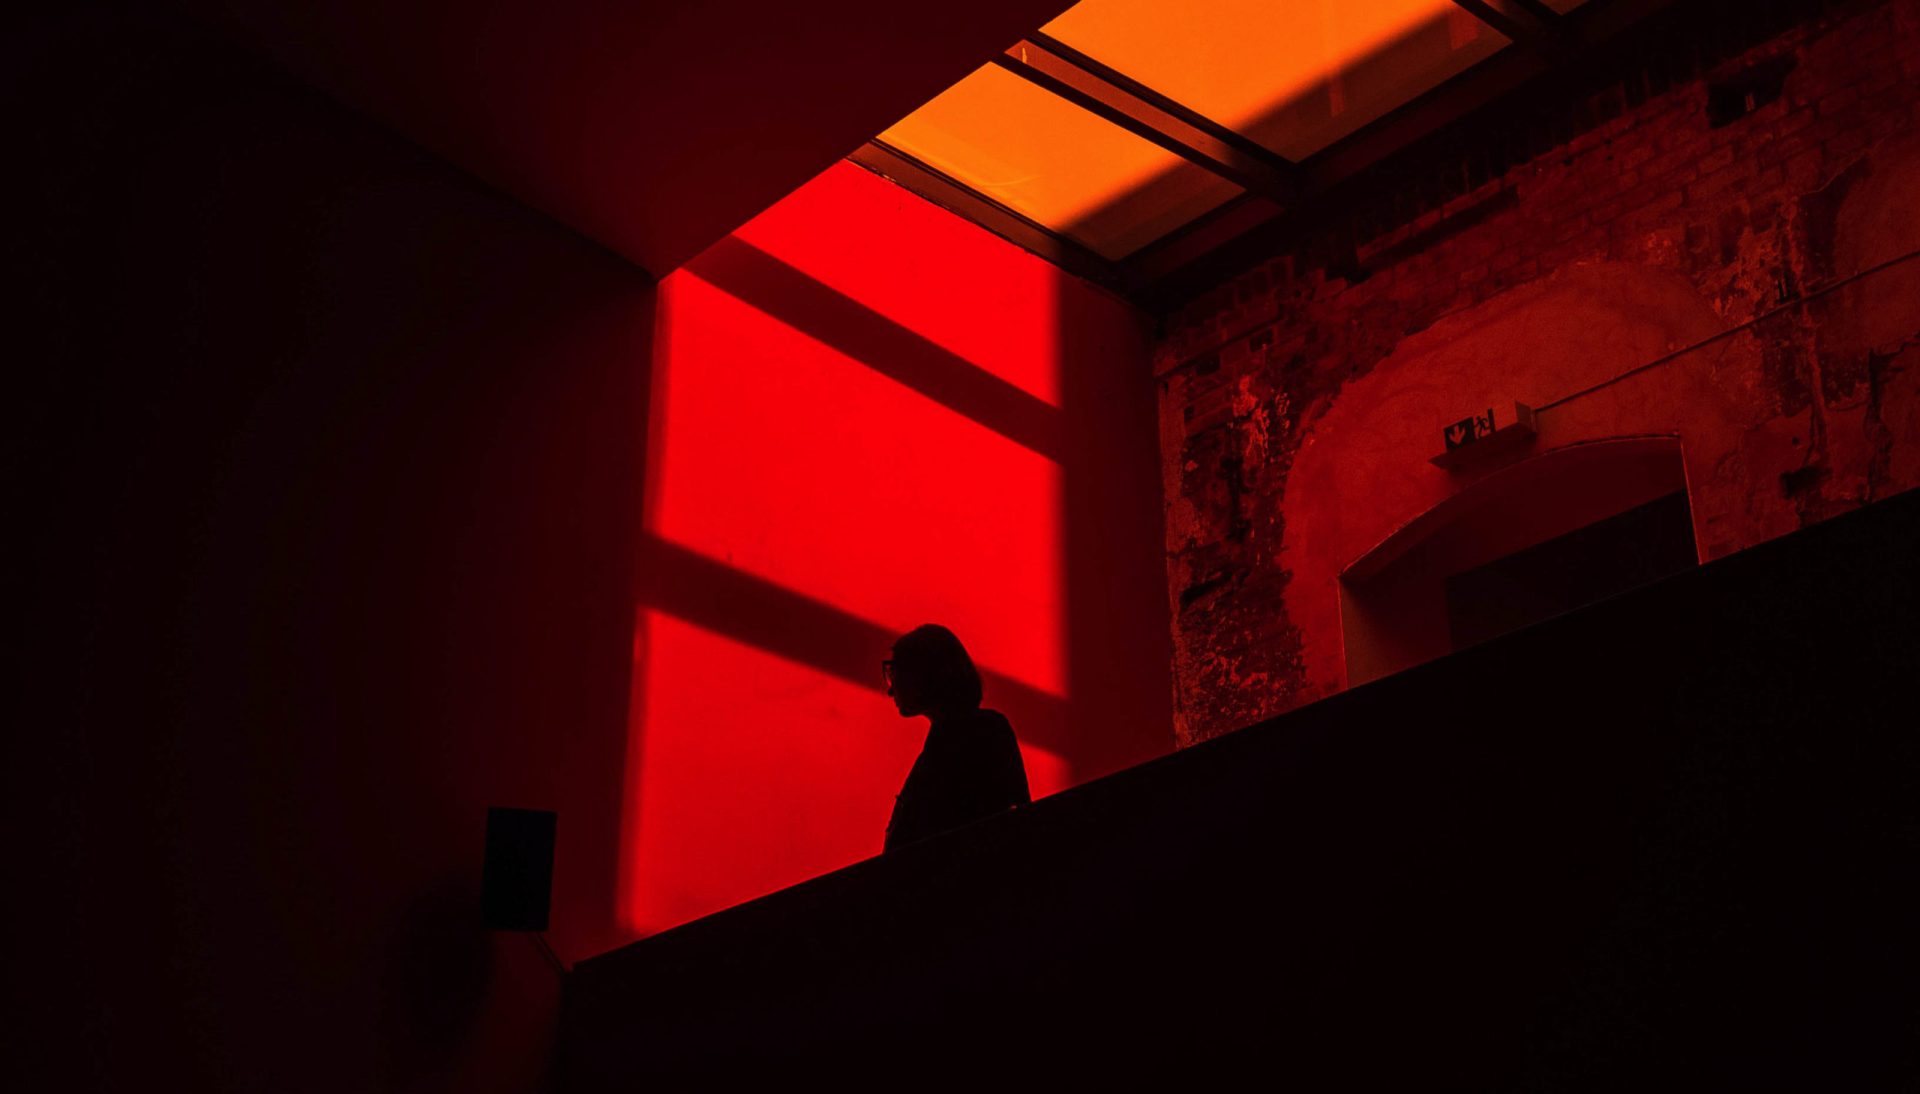 A person standing in an elevated place with orange light filling up the space